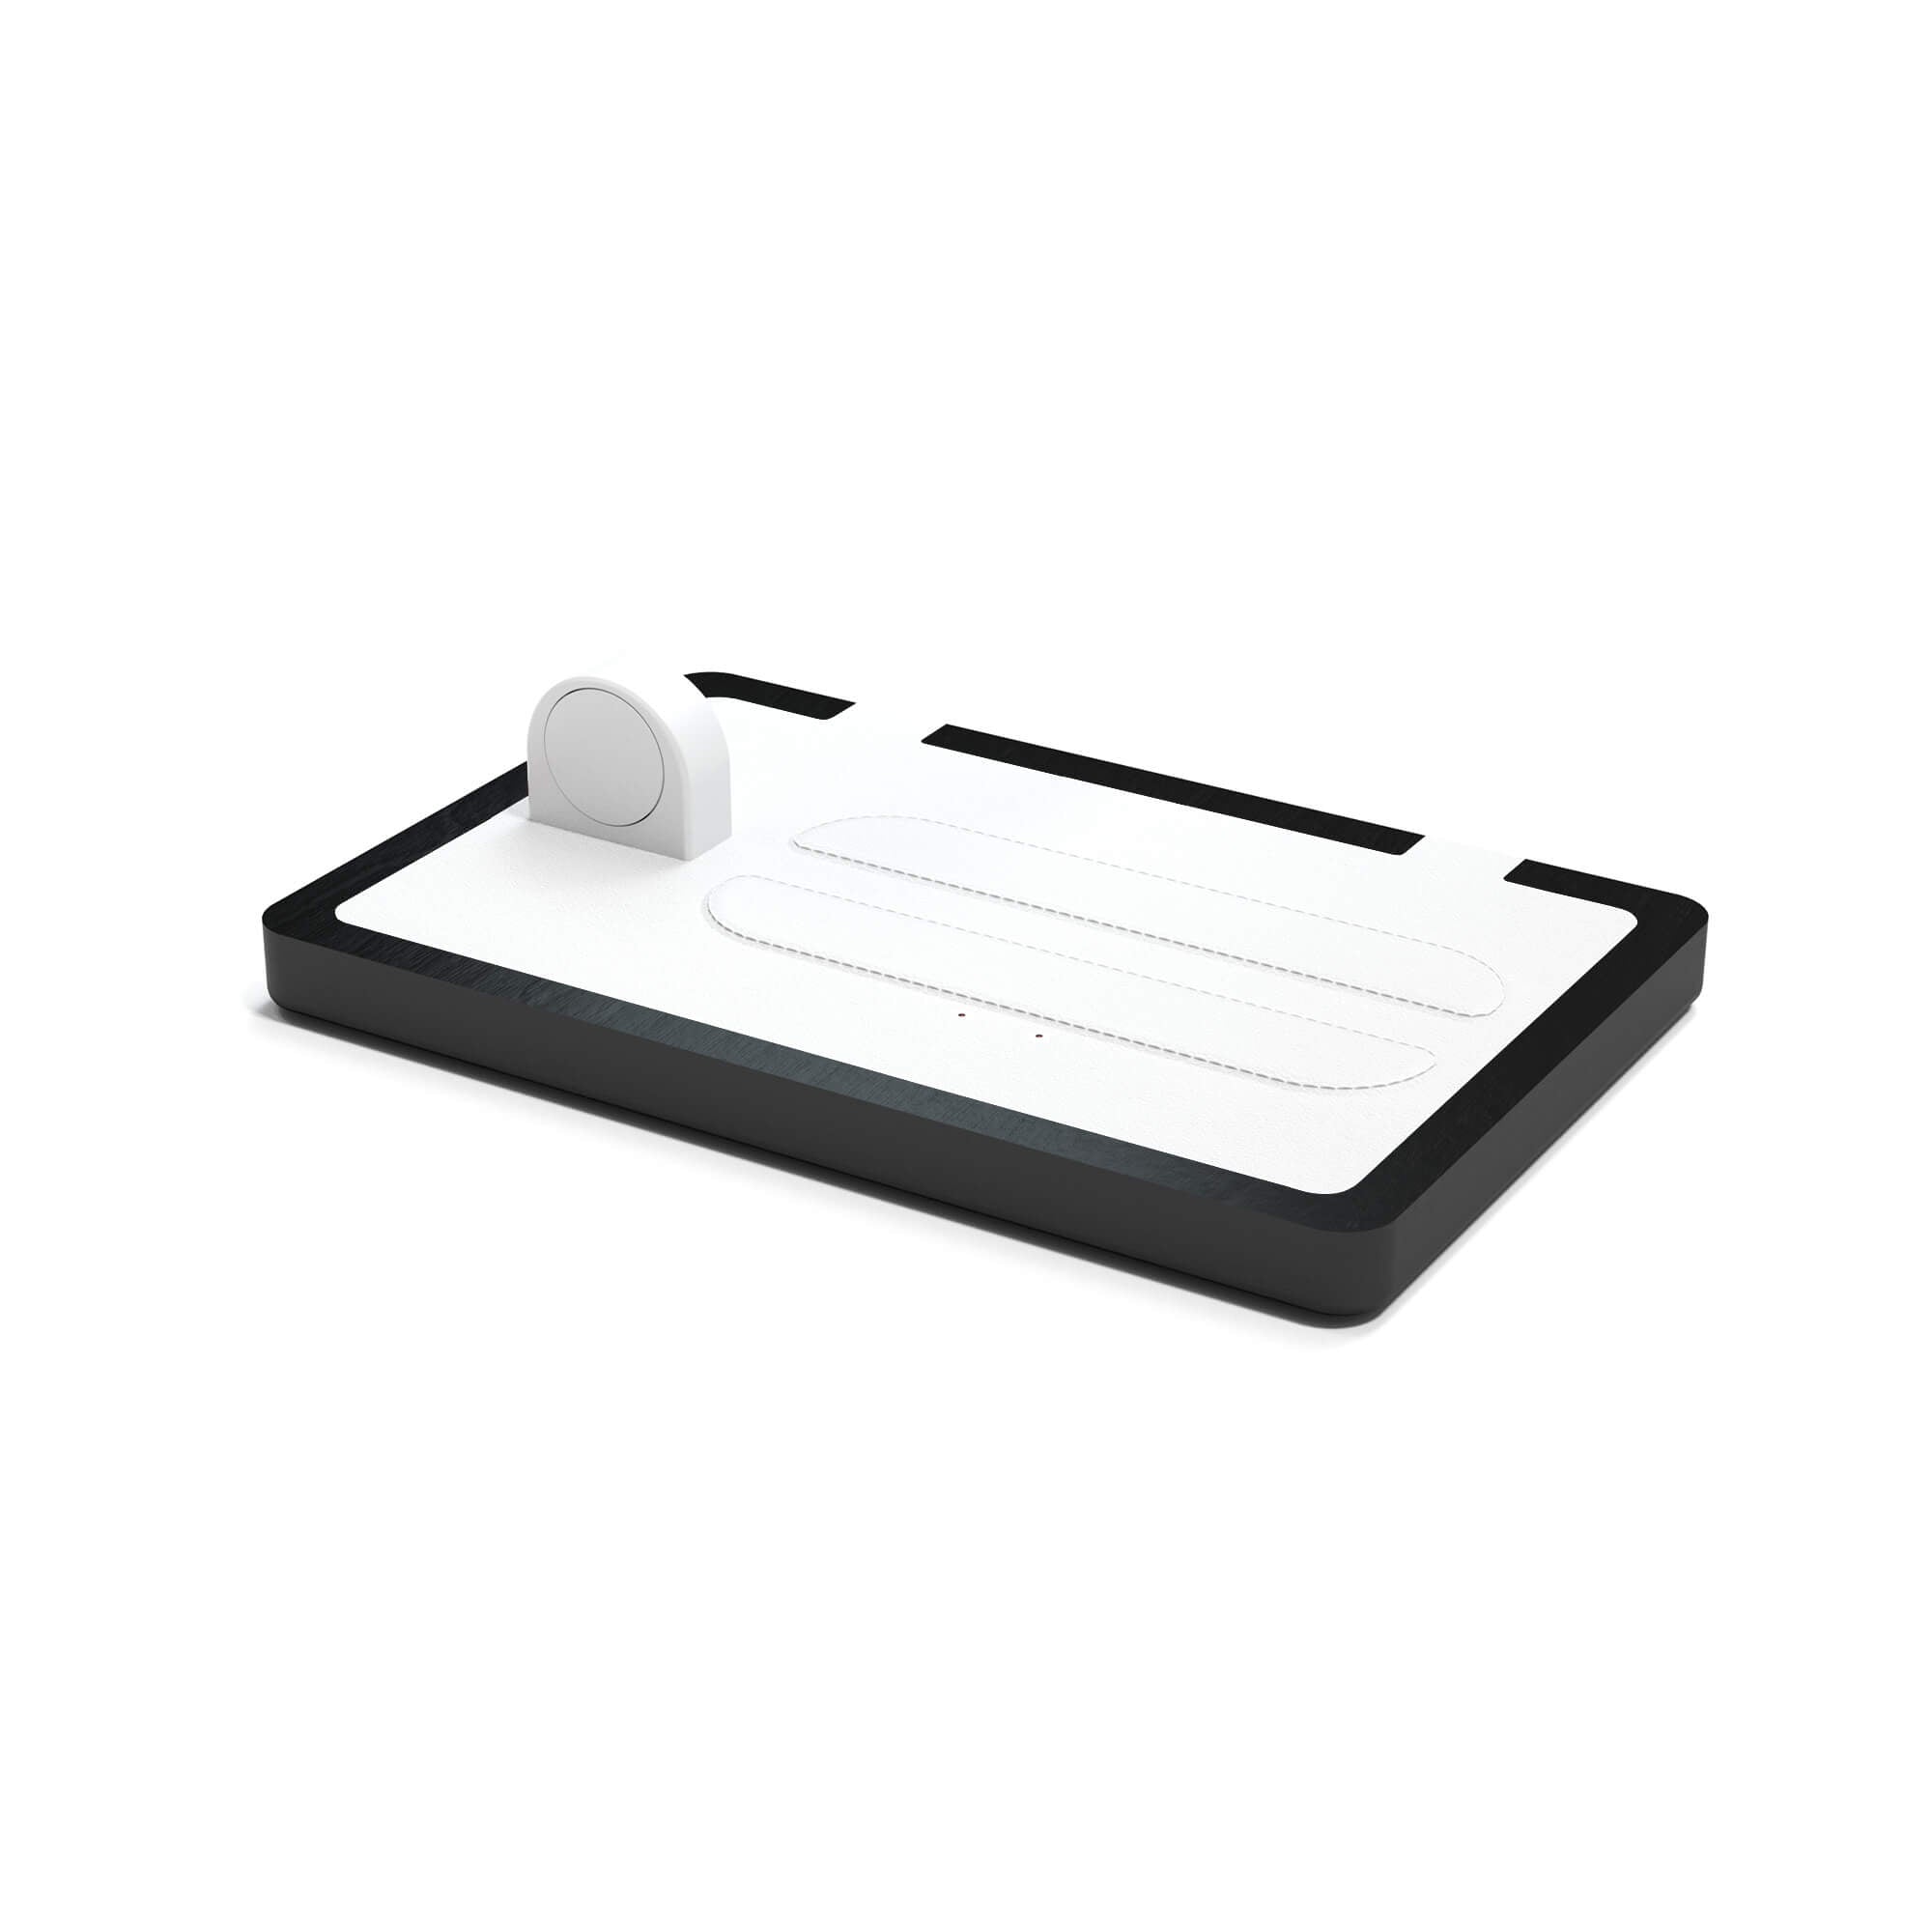 NYTSTND TRIO white leather top, Midnight black wood base, angle view without devices rustic white